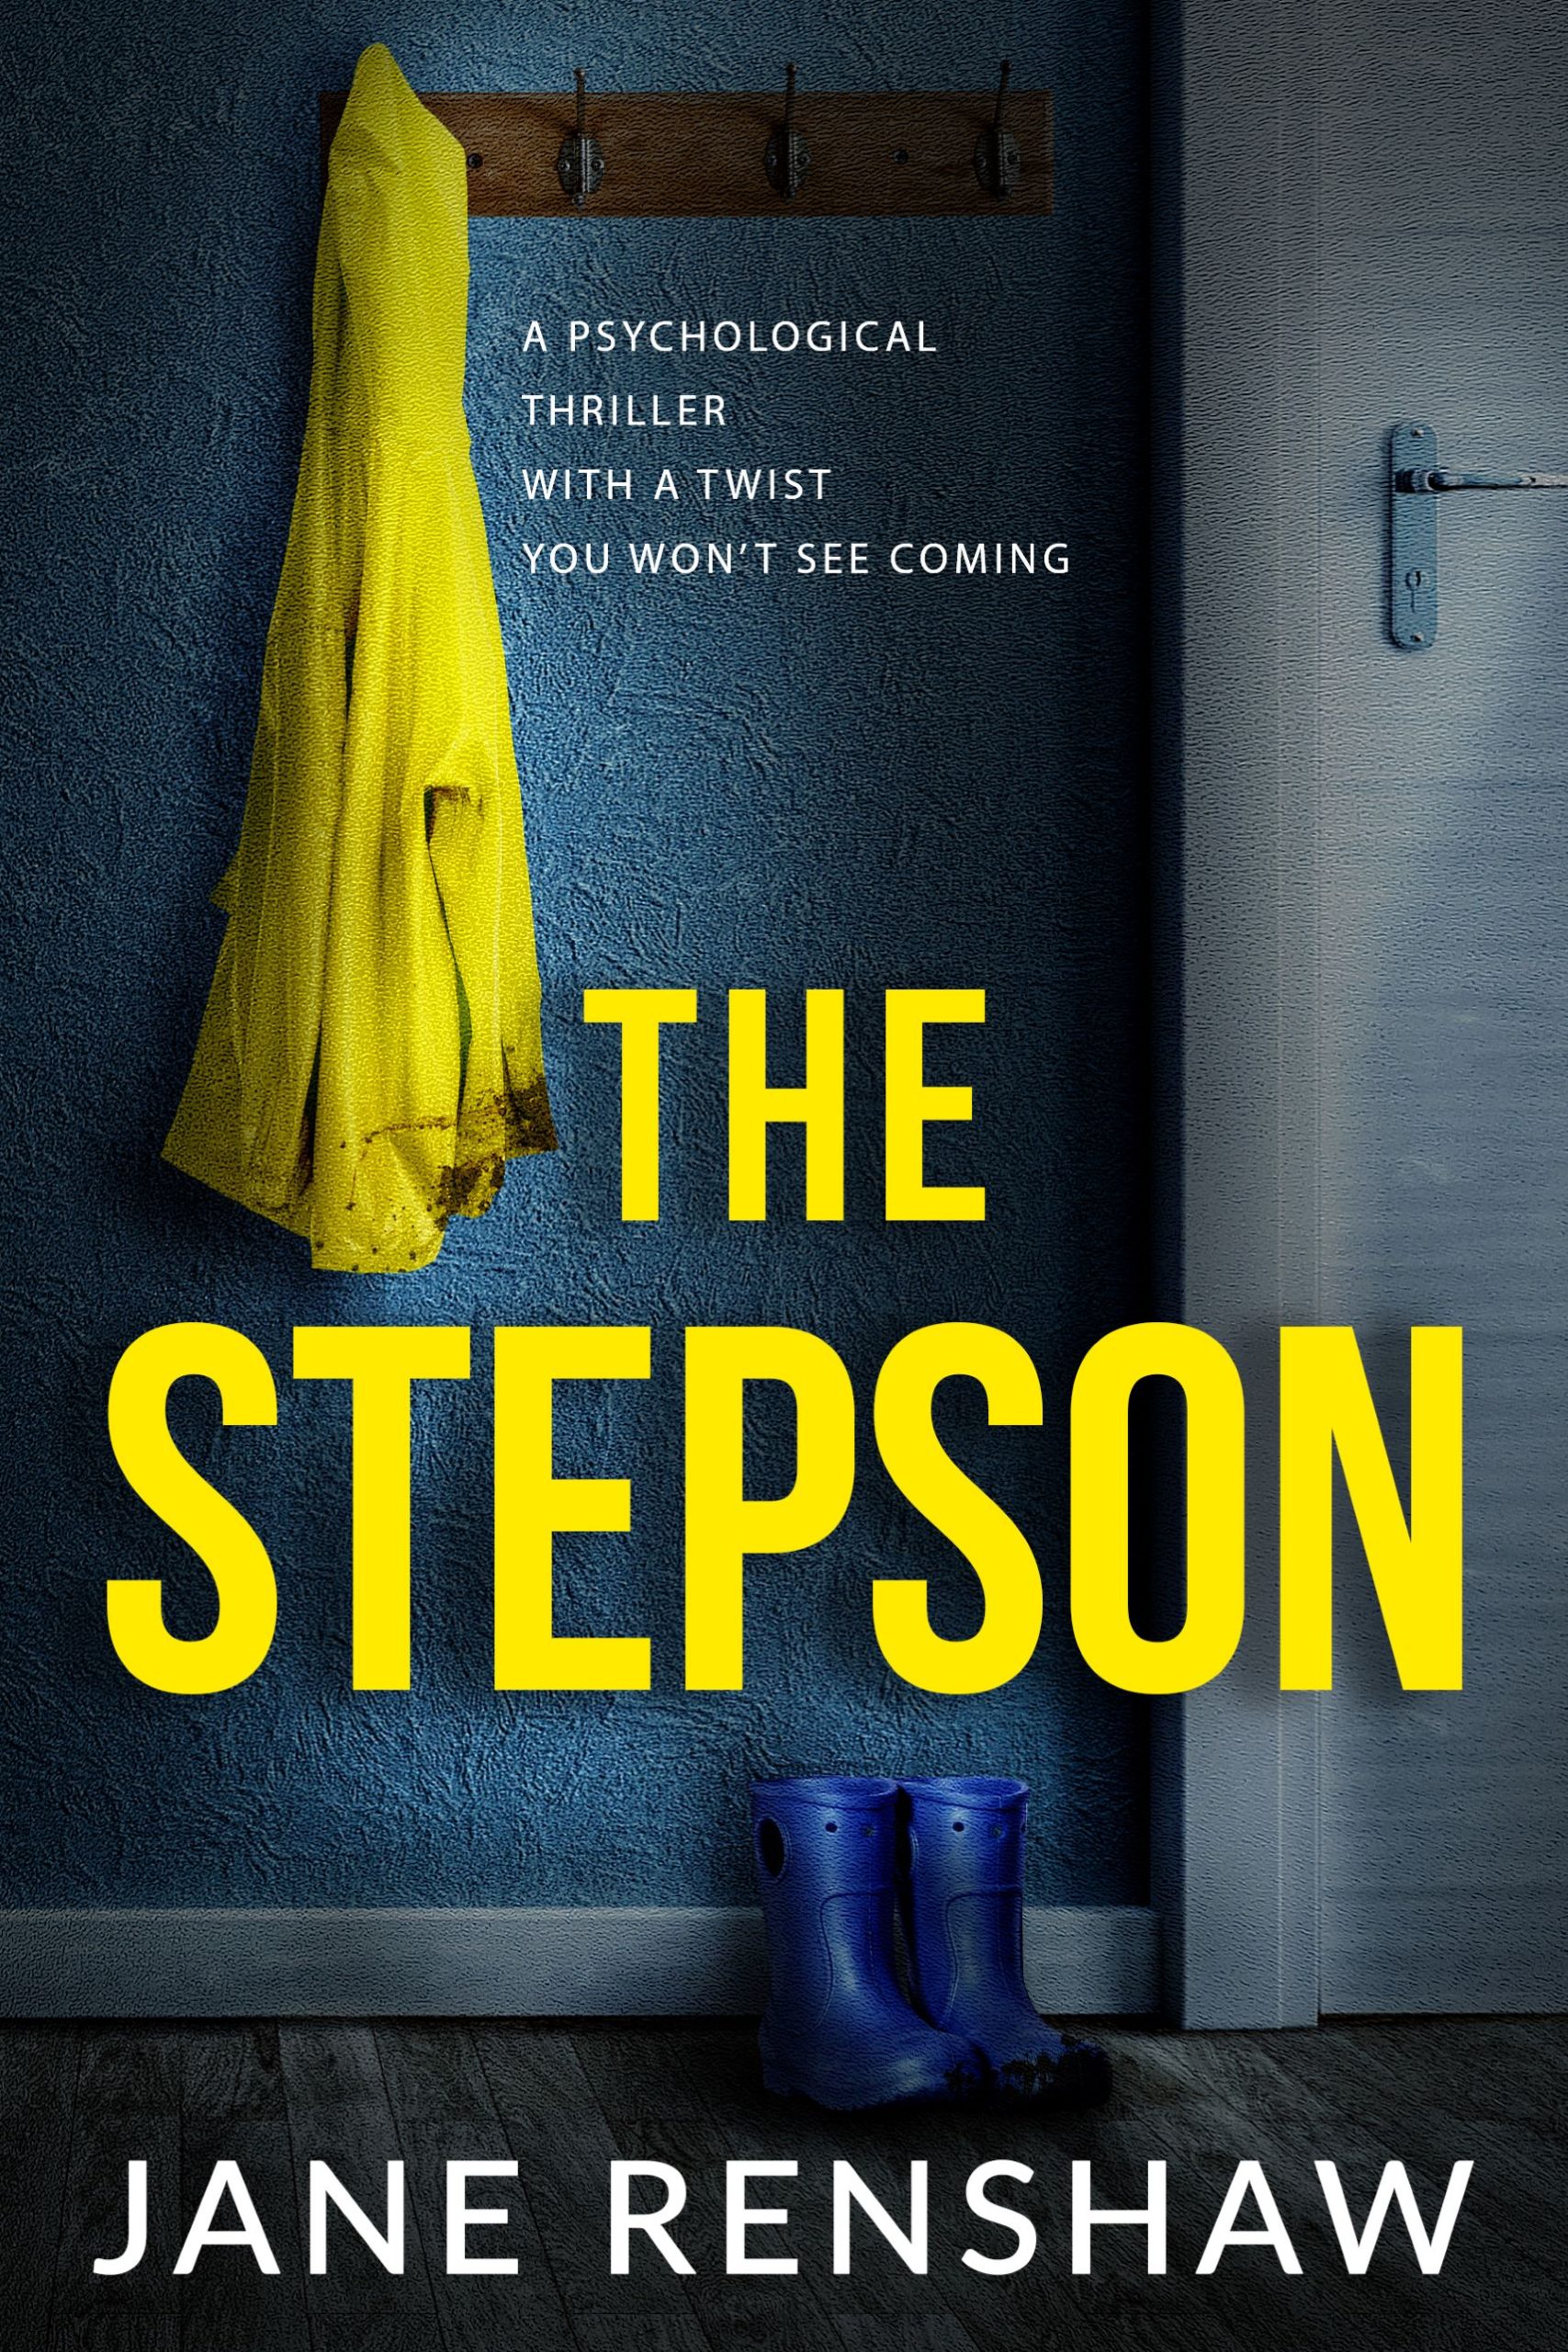 JANE RENSHAW NEW RELEASE – THE STEPSON